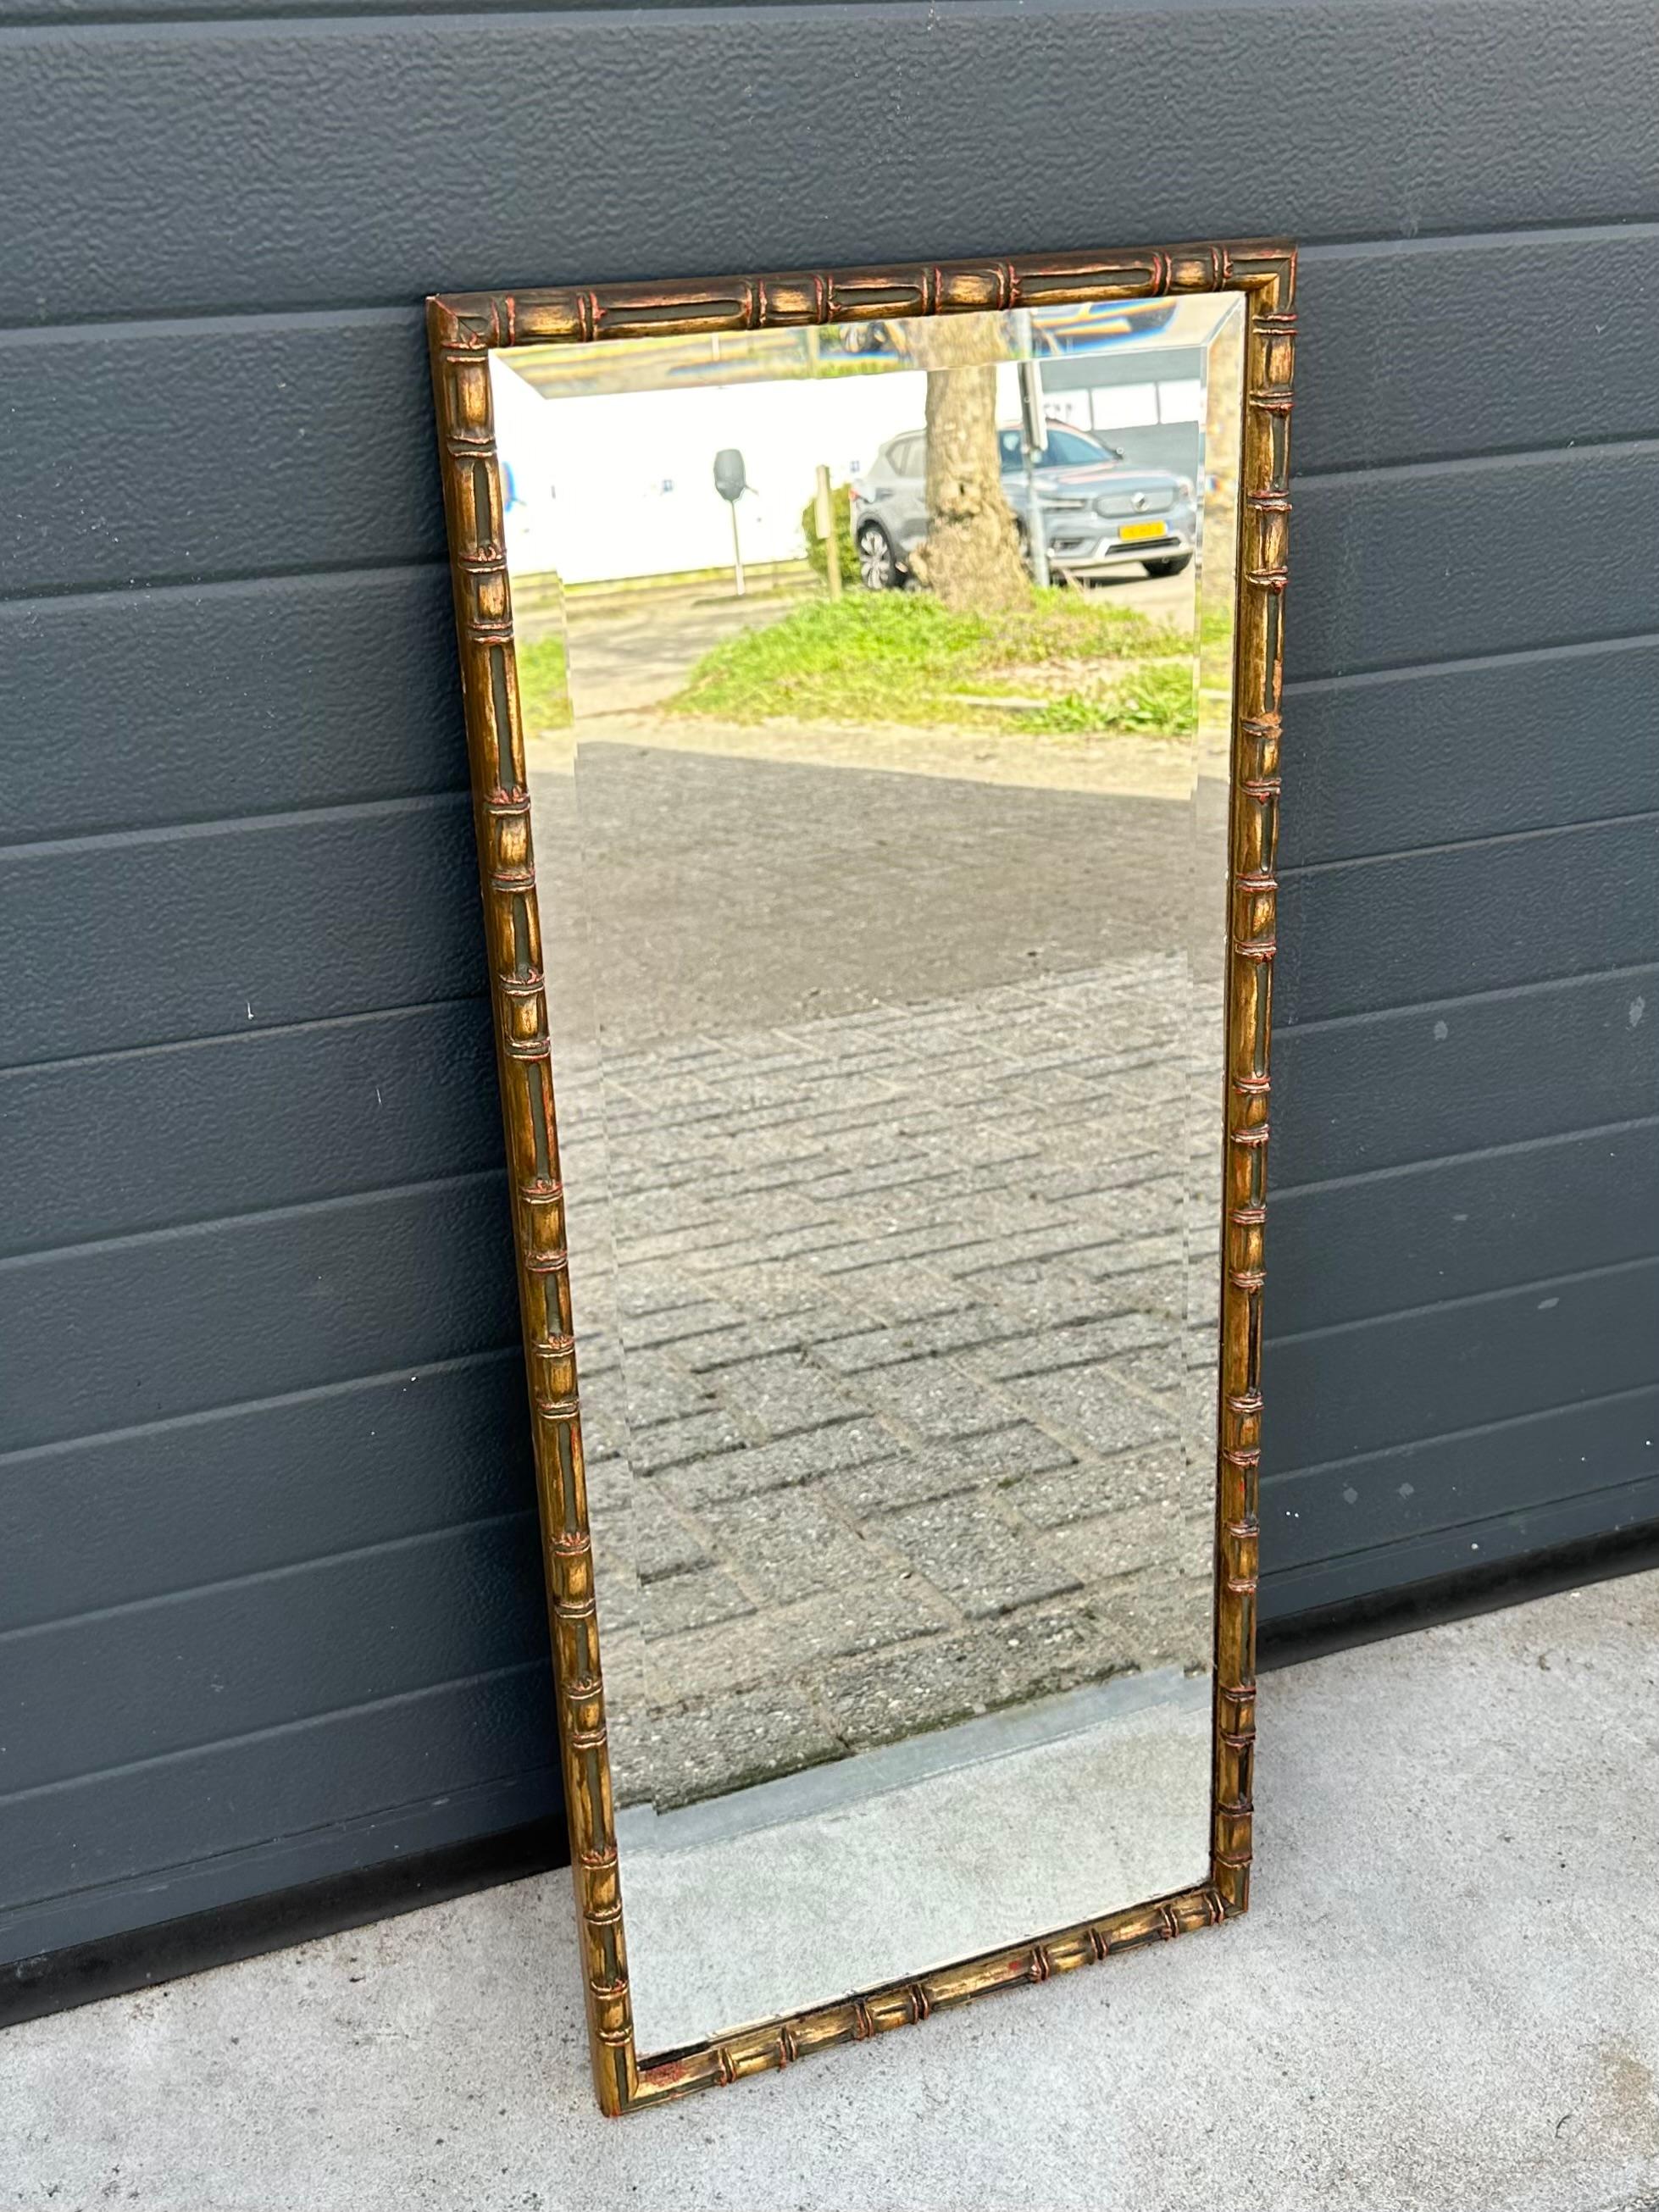 Striking Italian faux bamboo hand carved frame with a thick beveled mirror.

Via one of our foreign contacts we recently purchased this practical and handcrafted wall mirror from the midcentury modern era. The all hand-carved wooden frame is in a